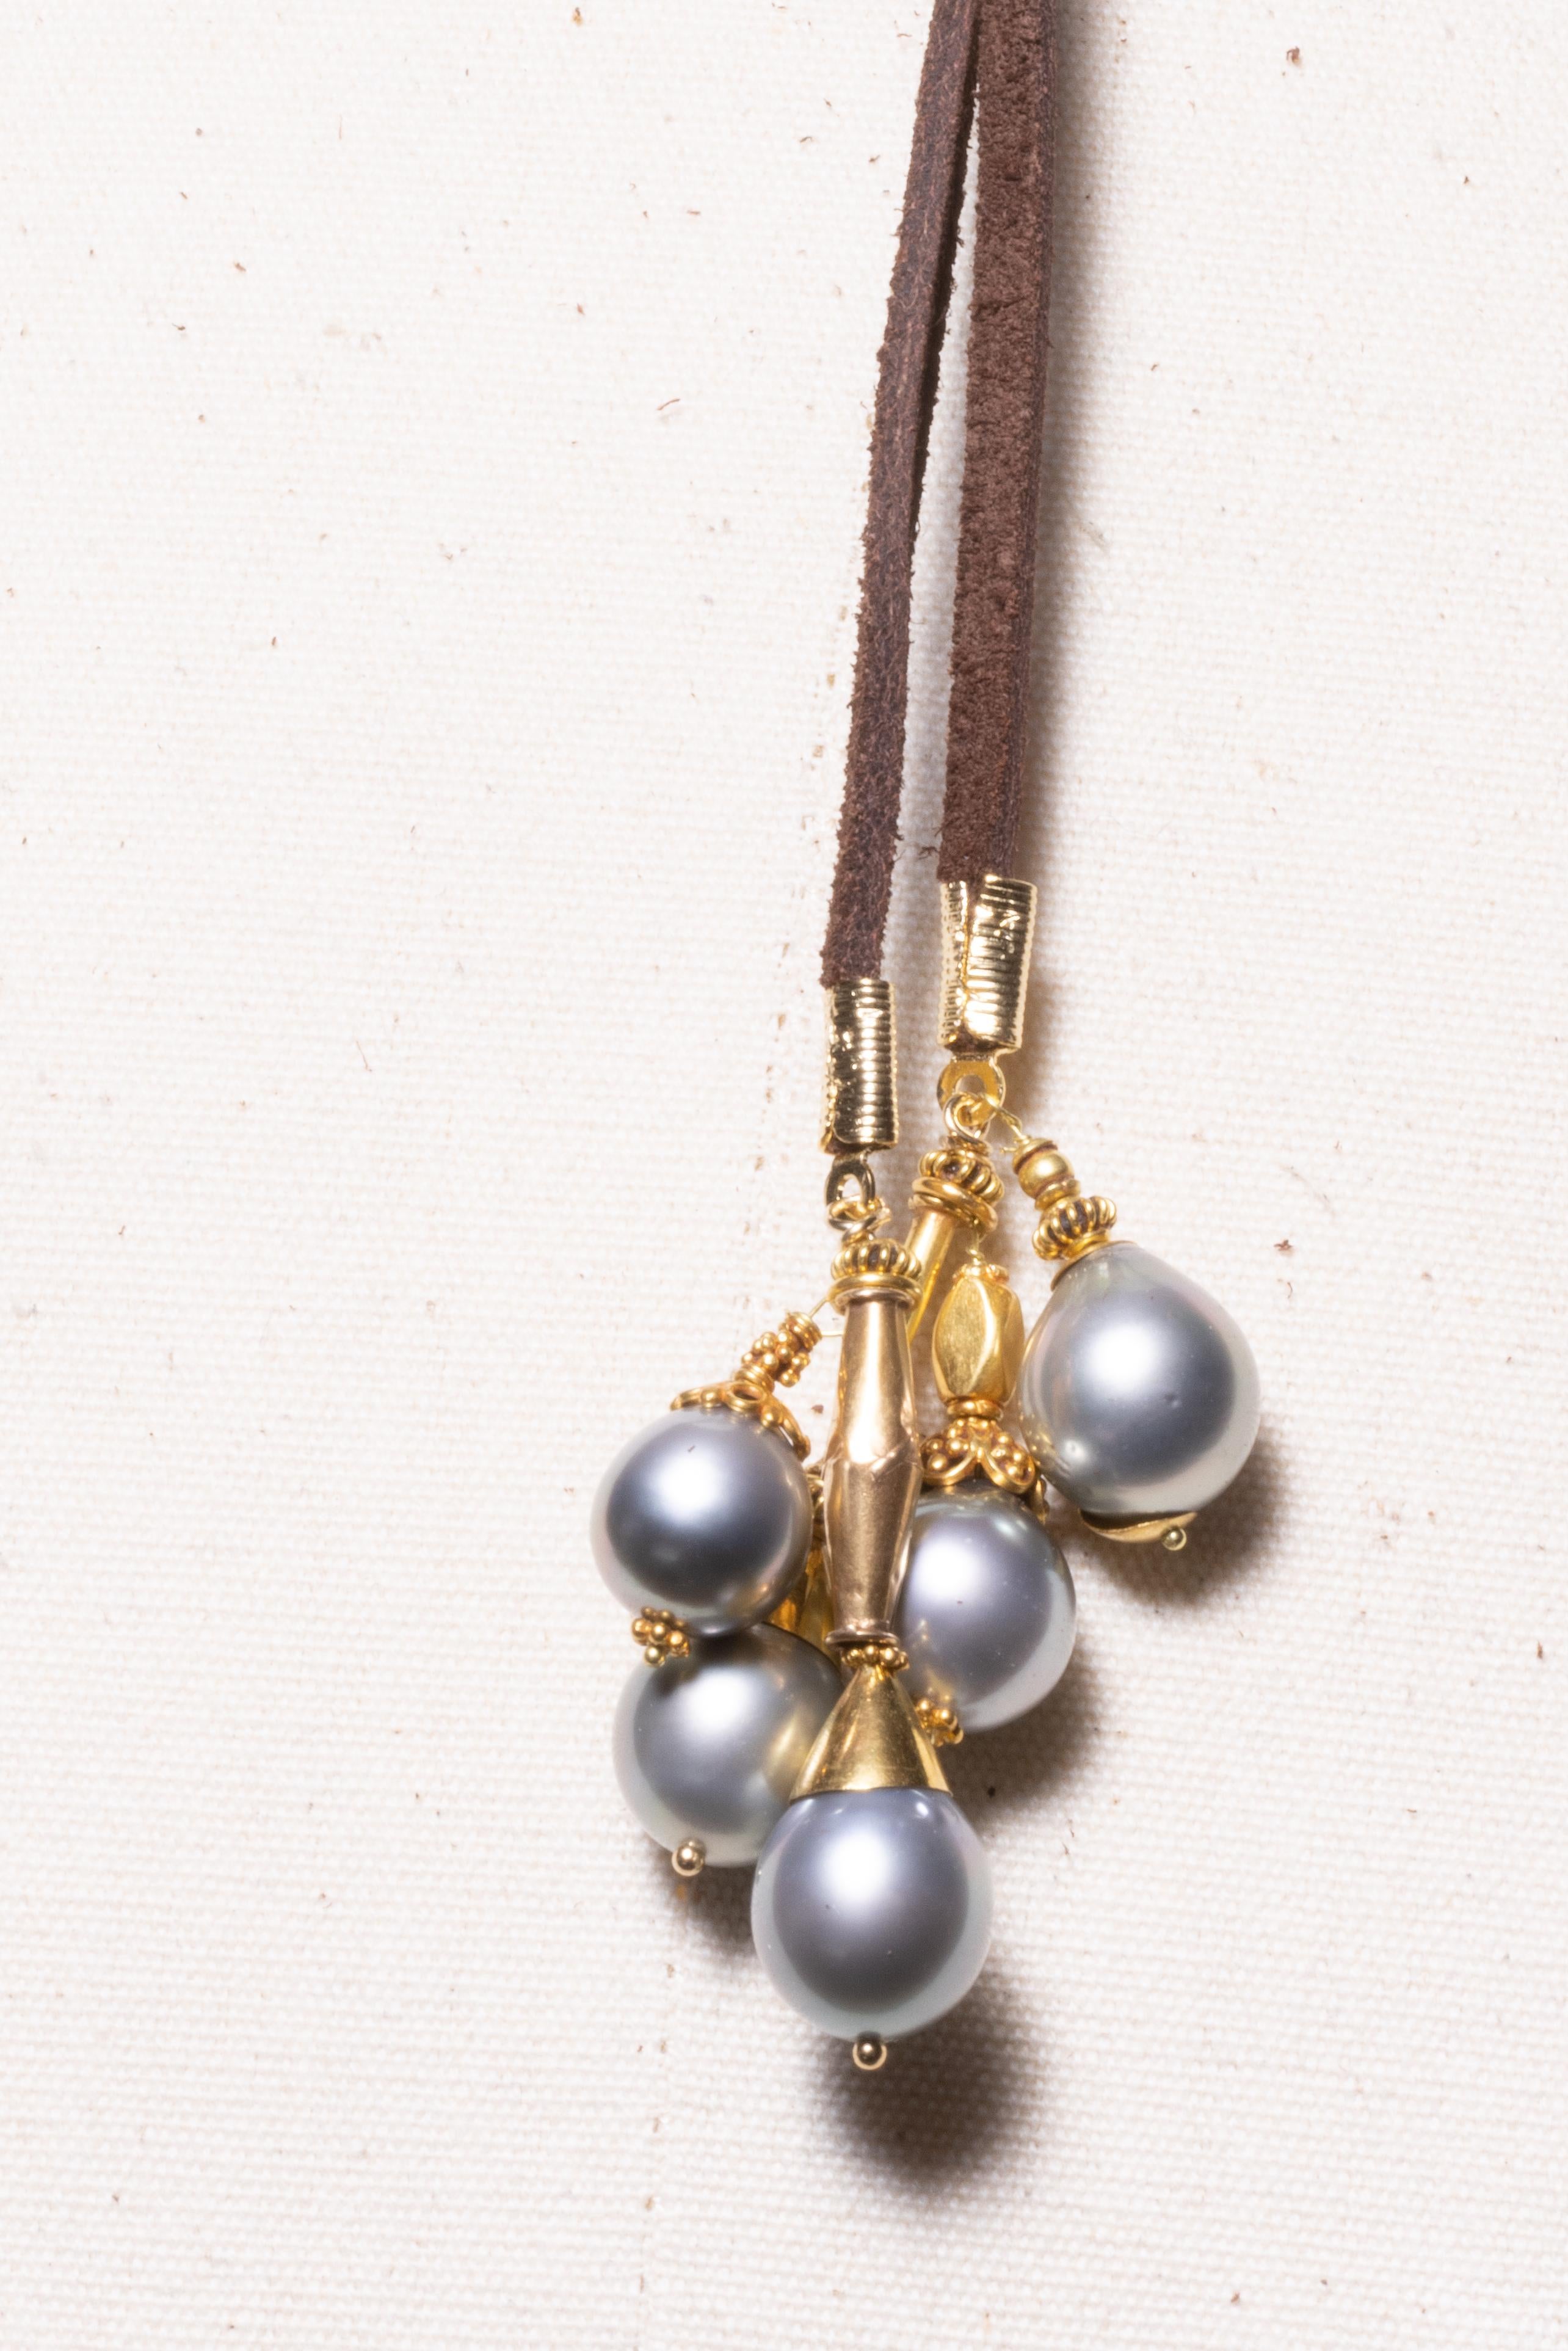 A very versatile and sexy suede lariat necklace with a cluster of Tahitian pearls and 18K gold.  Five tahitian pearls of various shapes and sizes, and beautifully hand tooled and granulated goldsmith work.  Double it and wear it short, or loop it